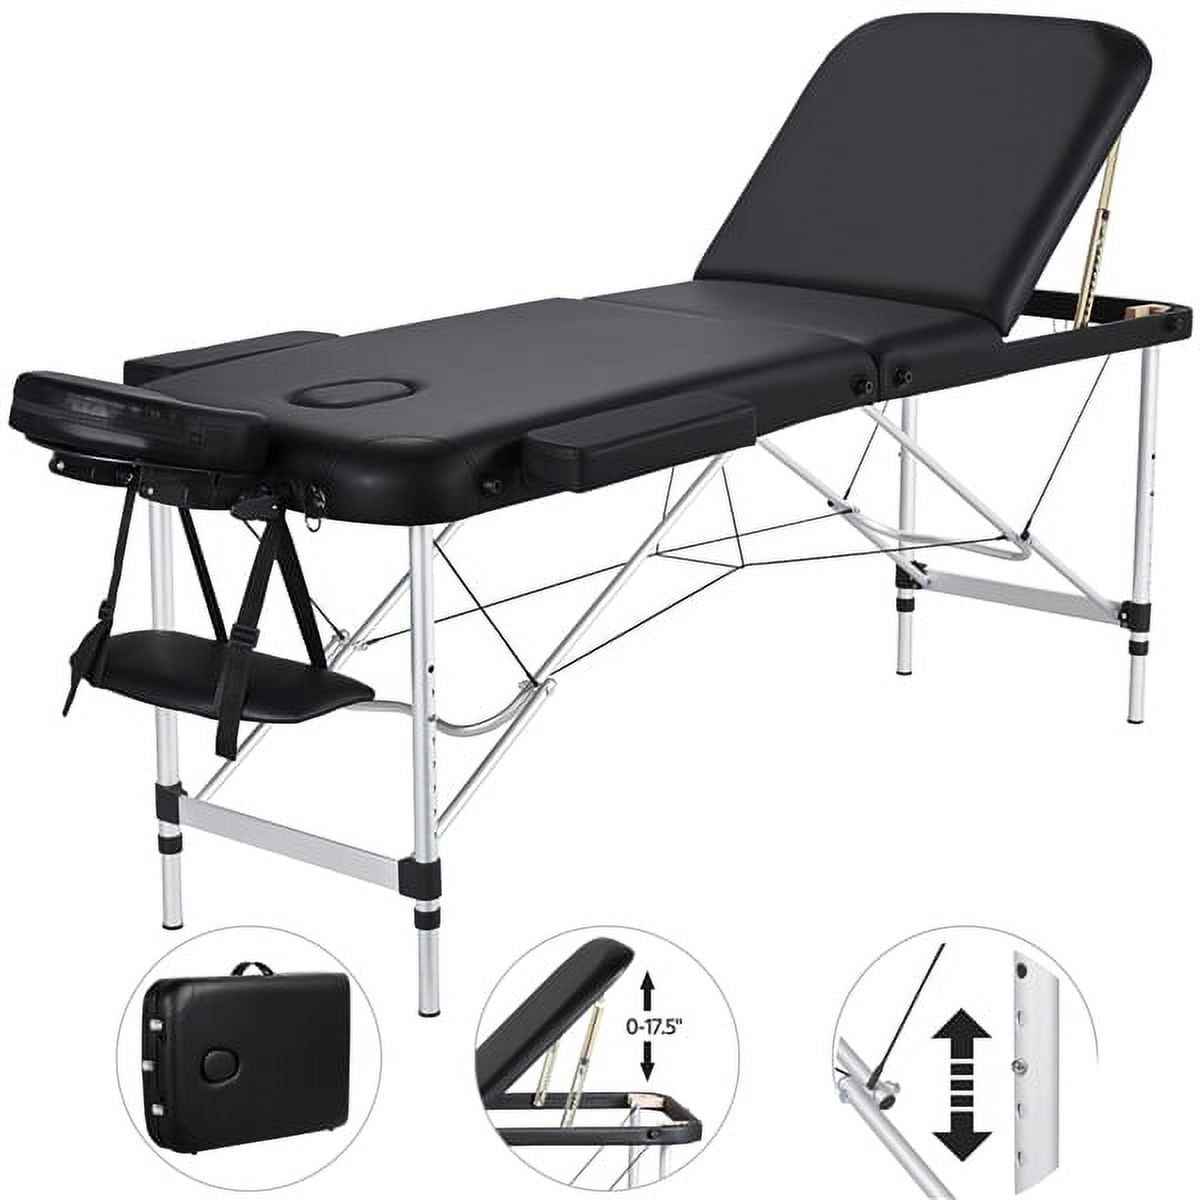 3-Section Aluminum 84 L Portable Massage Table Facial SPA Bed Tattoo w/Bolster  Pillow - 2022 New model Blue